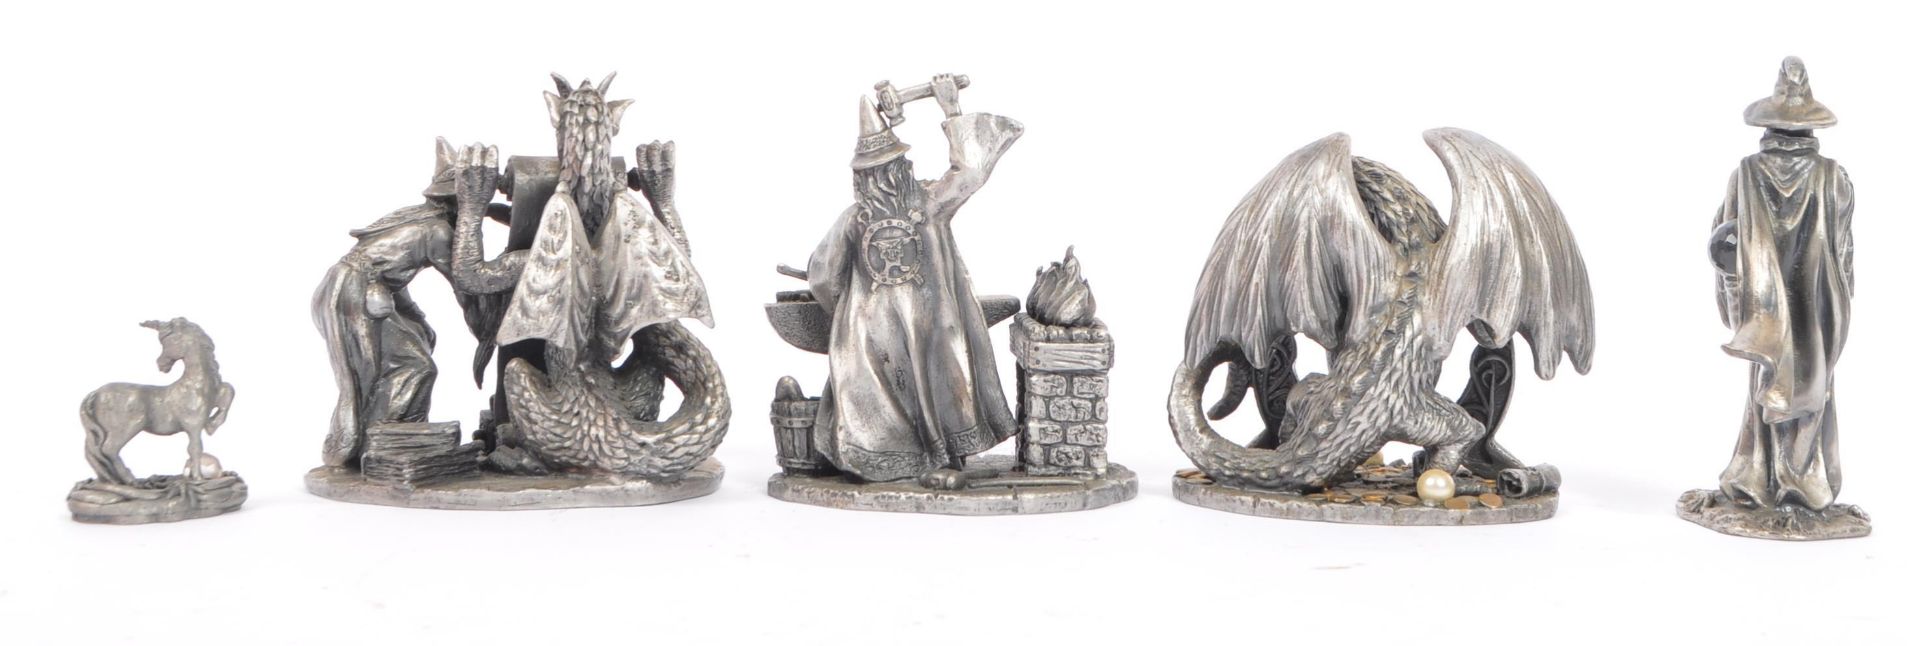 FIVE PEWTER TOLKIEN FIGURINES BY WAPW / SC WARD & SC RILEY - Image 4 of 7